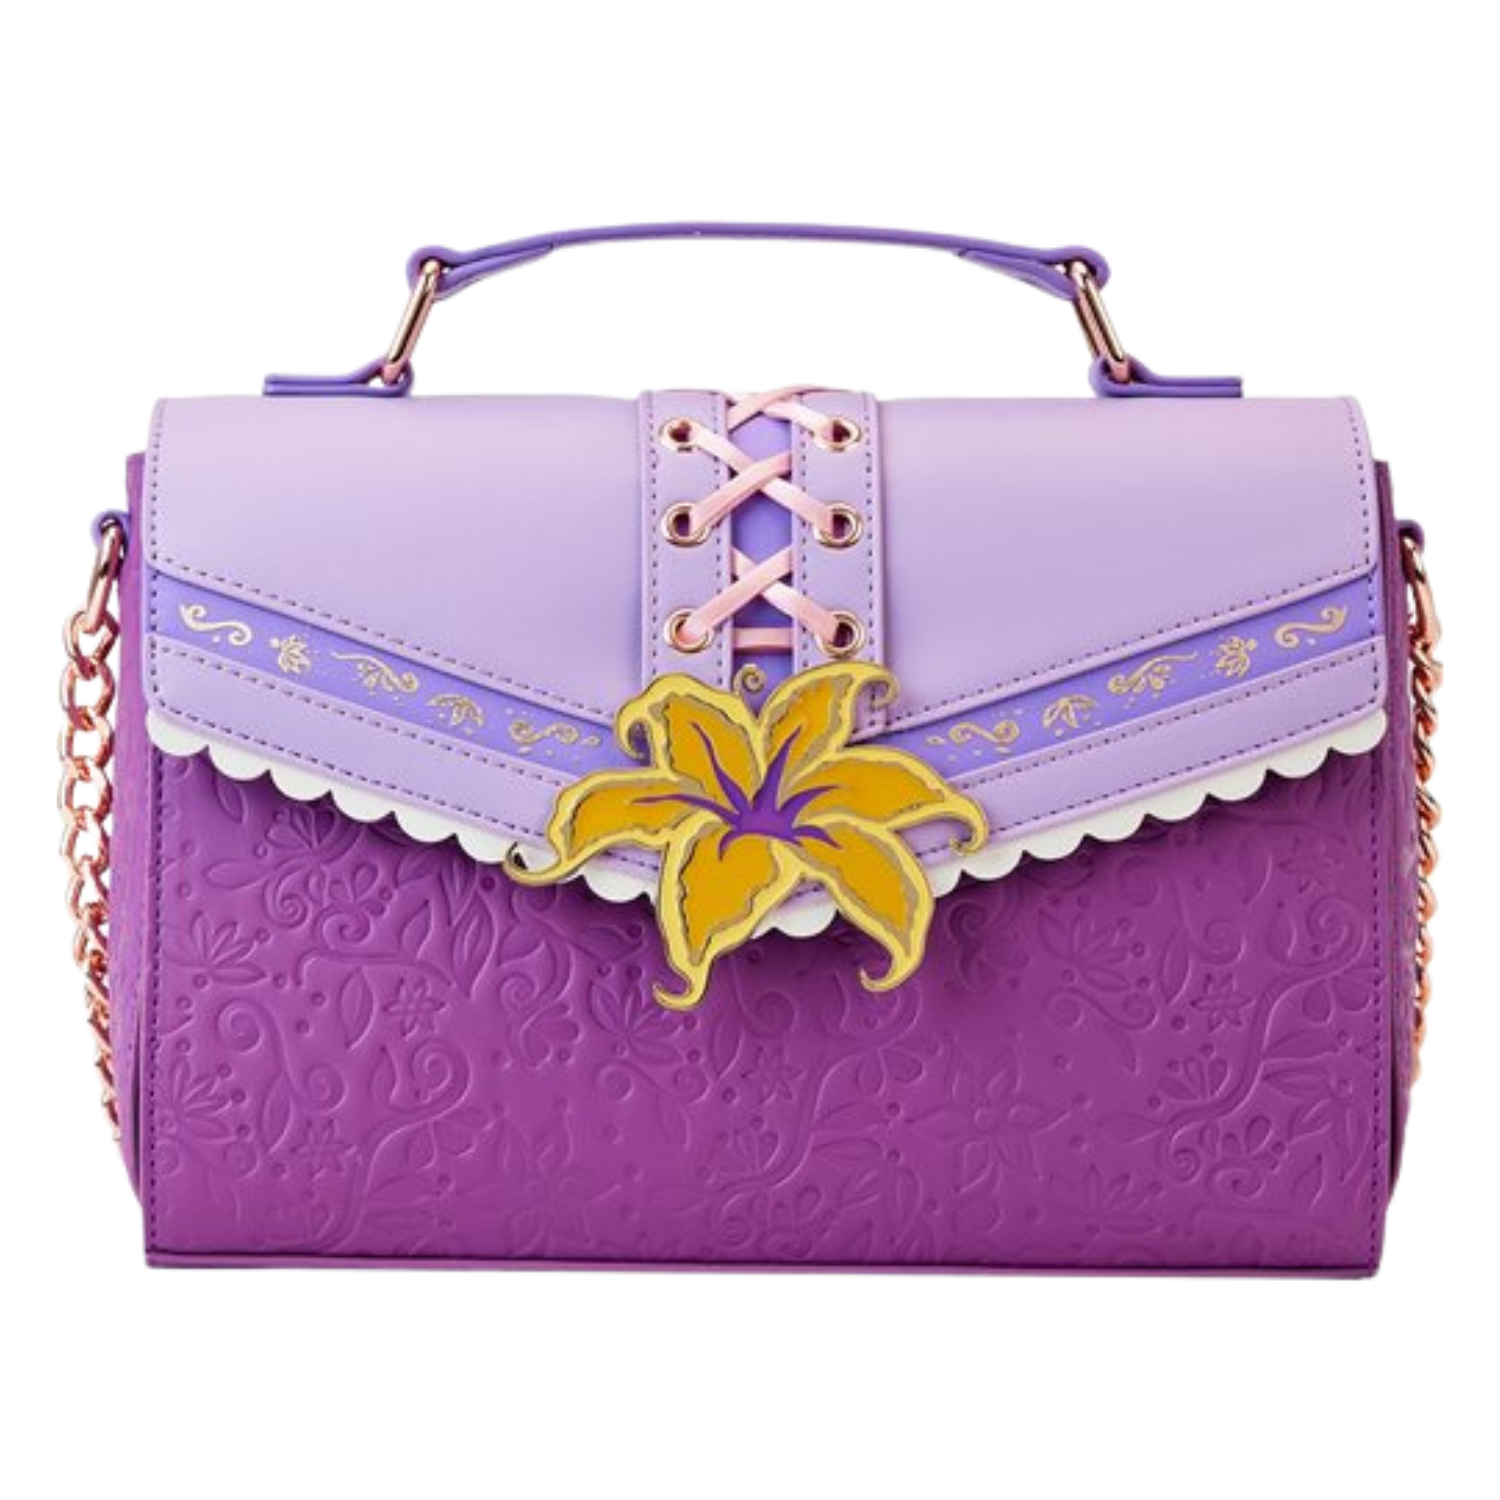 This image shows a purple purse with a golden yellow flower clasp on the front and made to look like Rapunzel's outfit